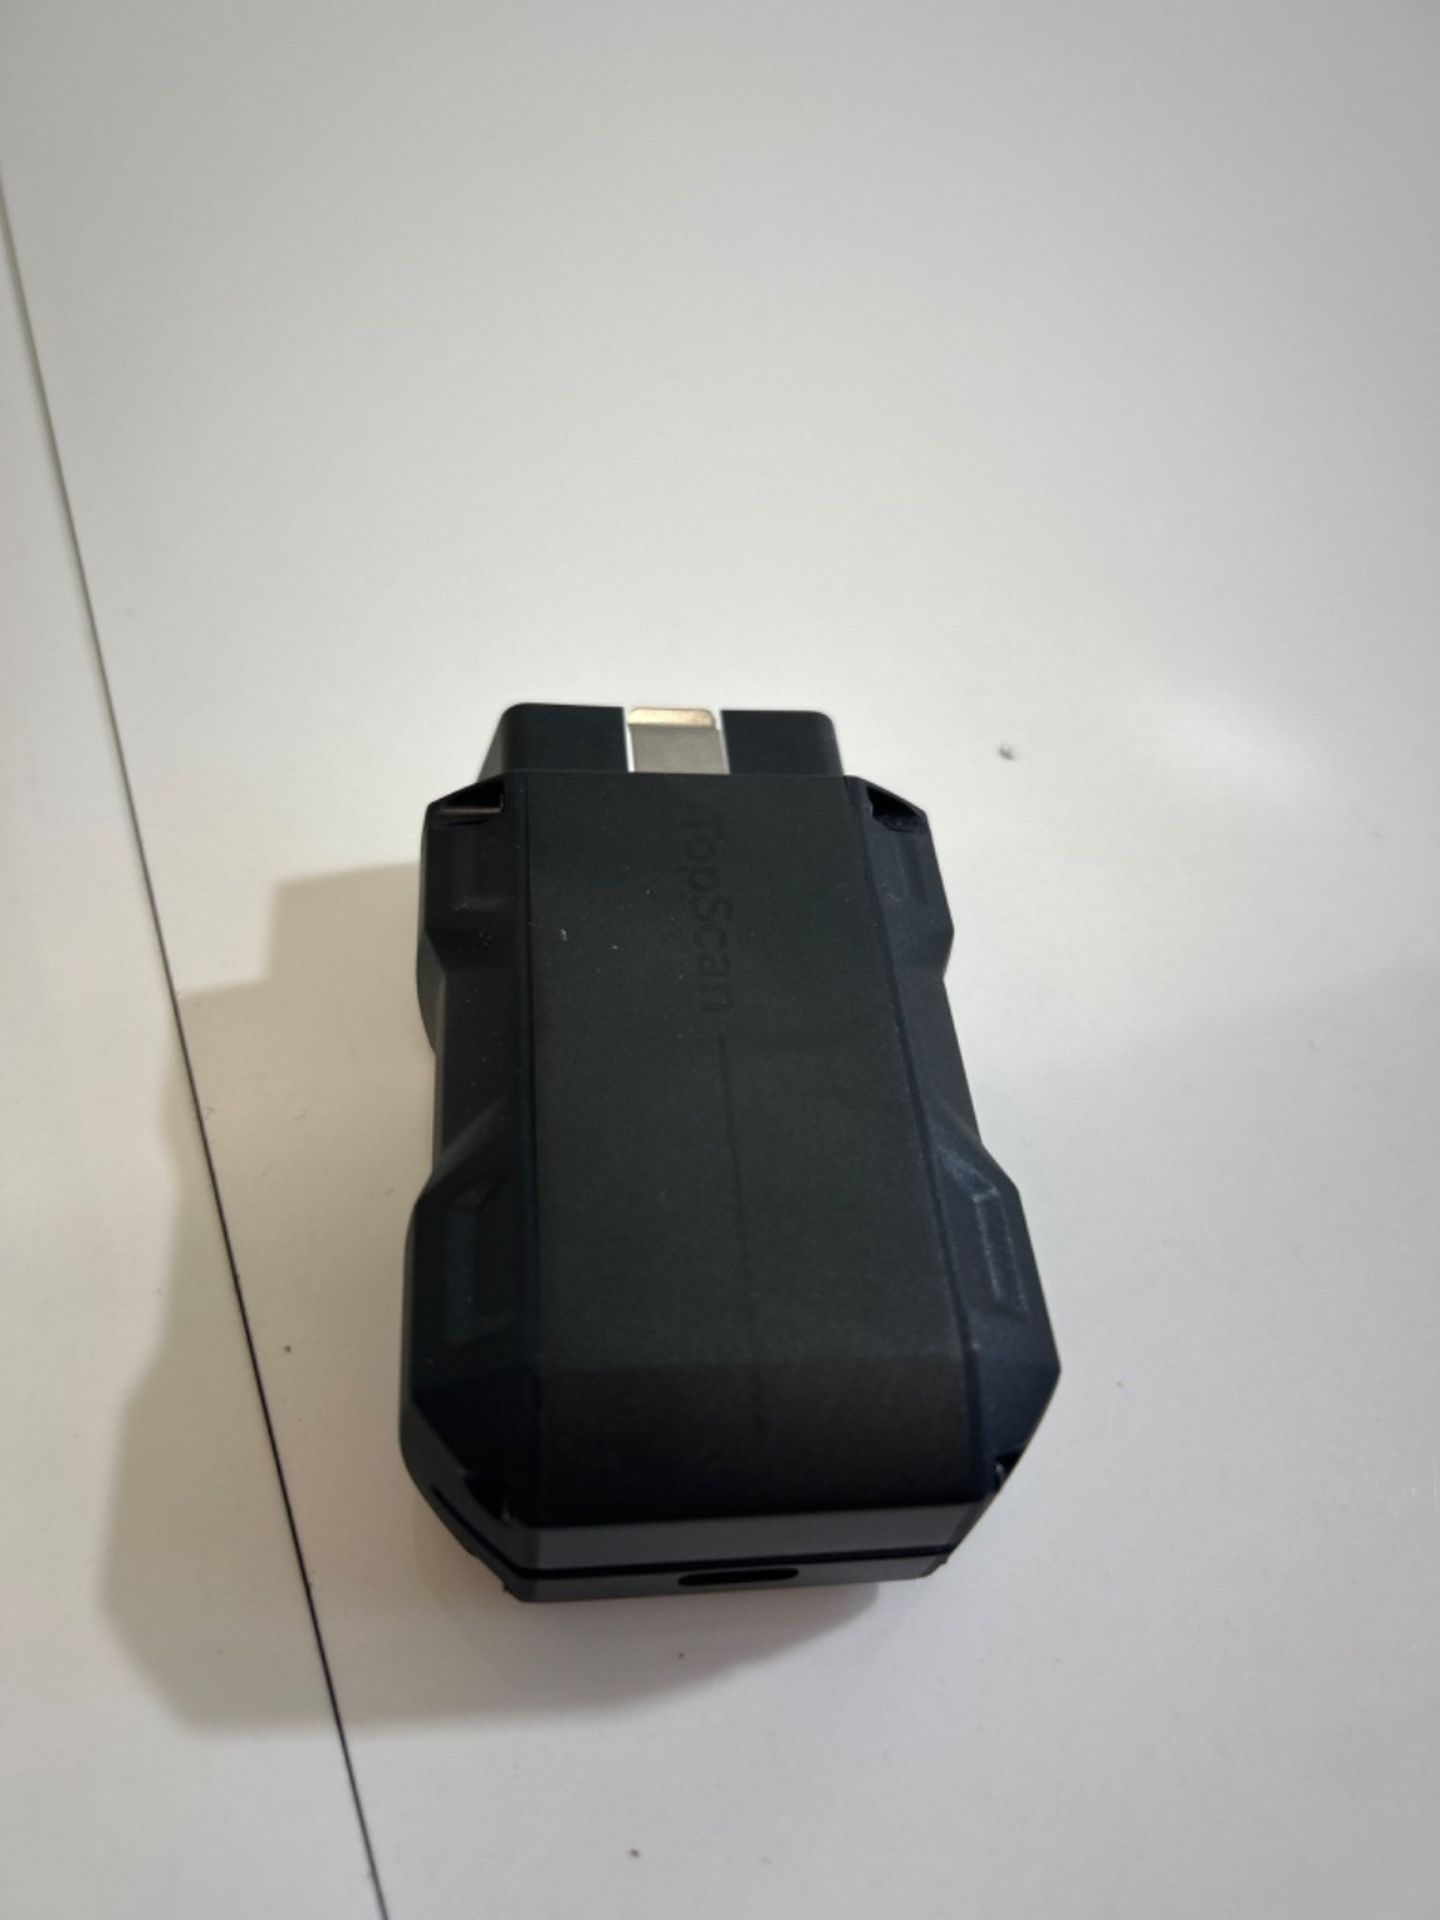 TOPDON Topscan OBD2 Scanner Bluetooth, Wireless OBD2 Code Reader with Active Test, 8 Reset, Car Dia - Image 3 of 3